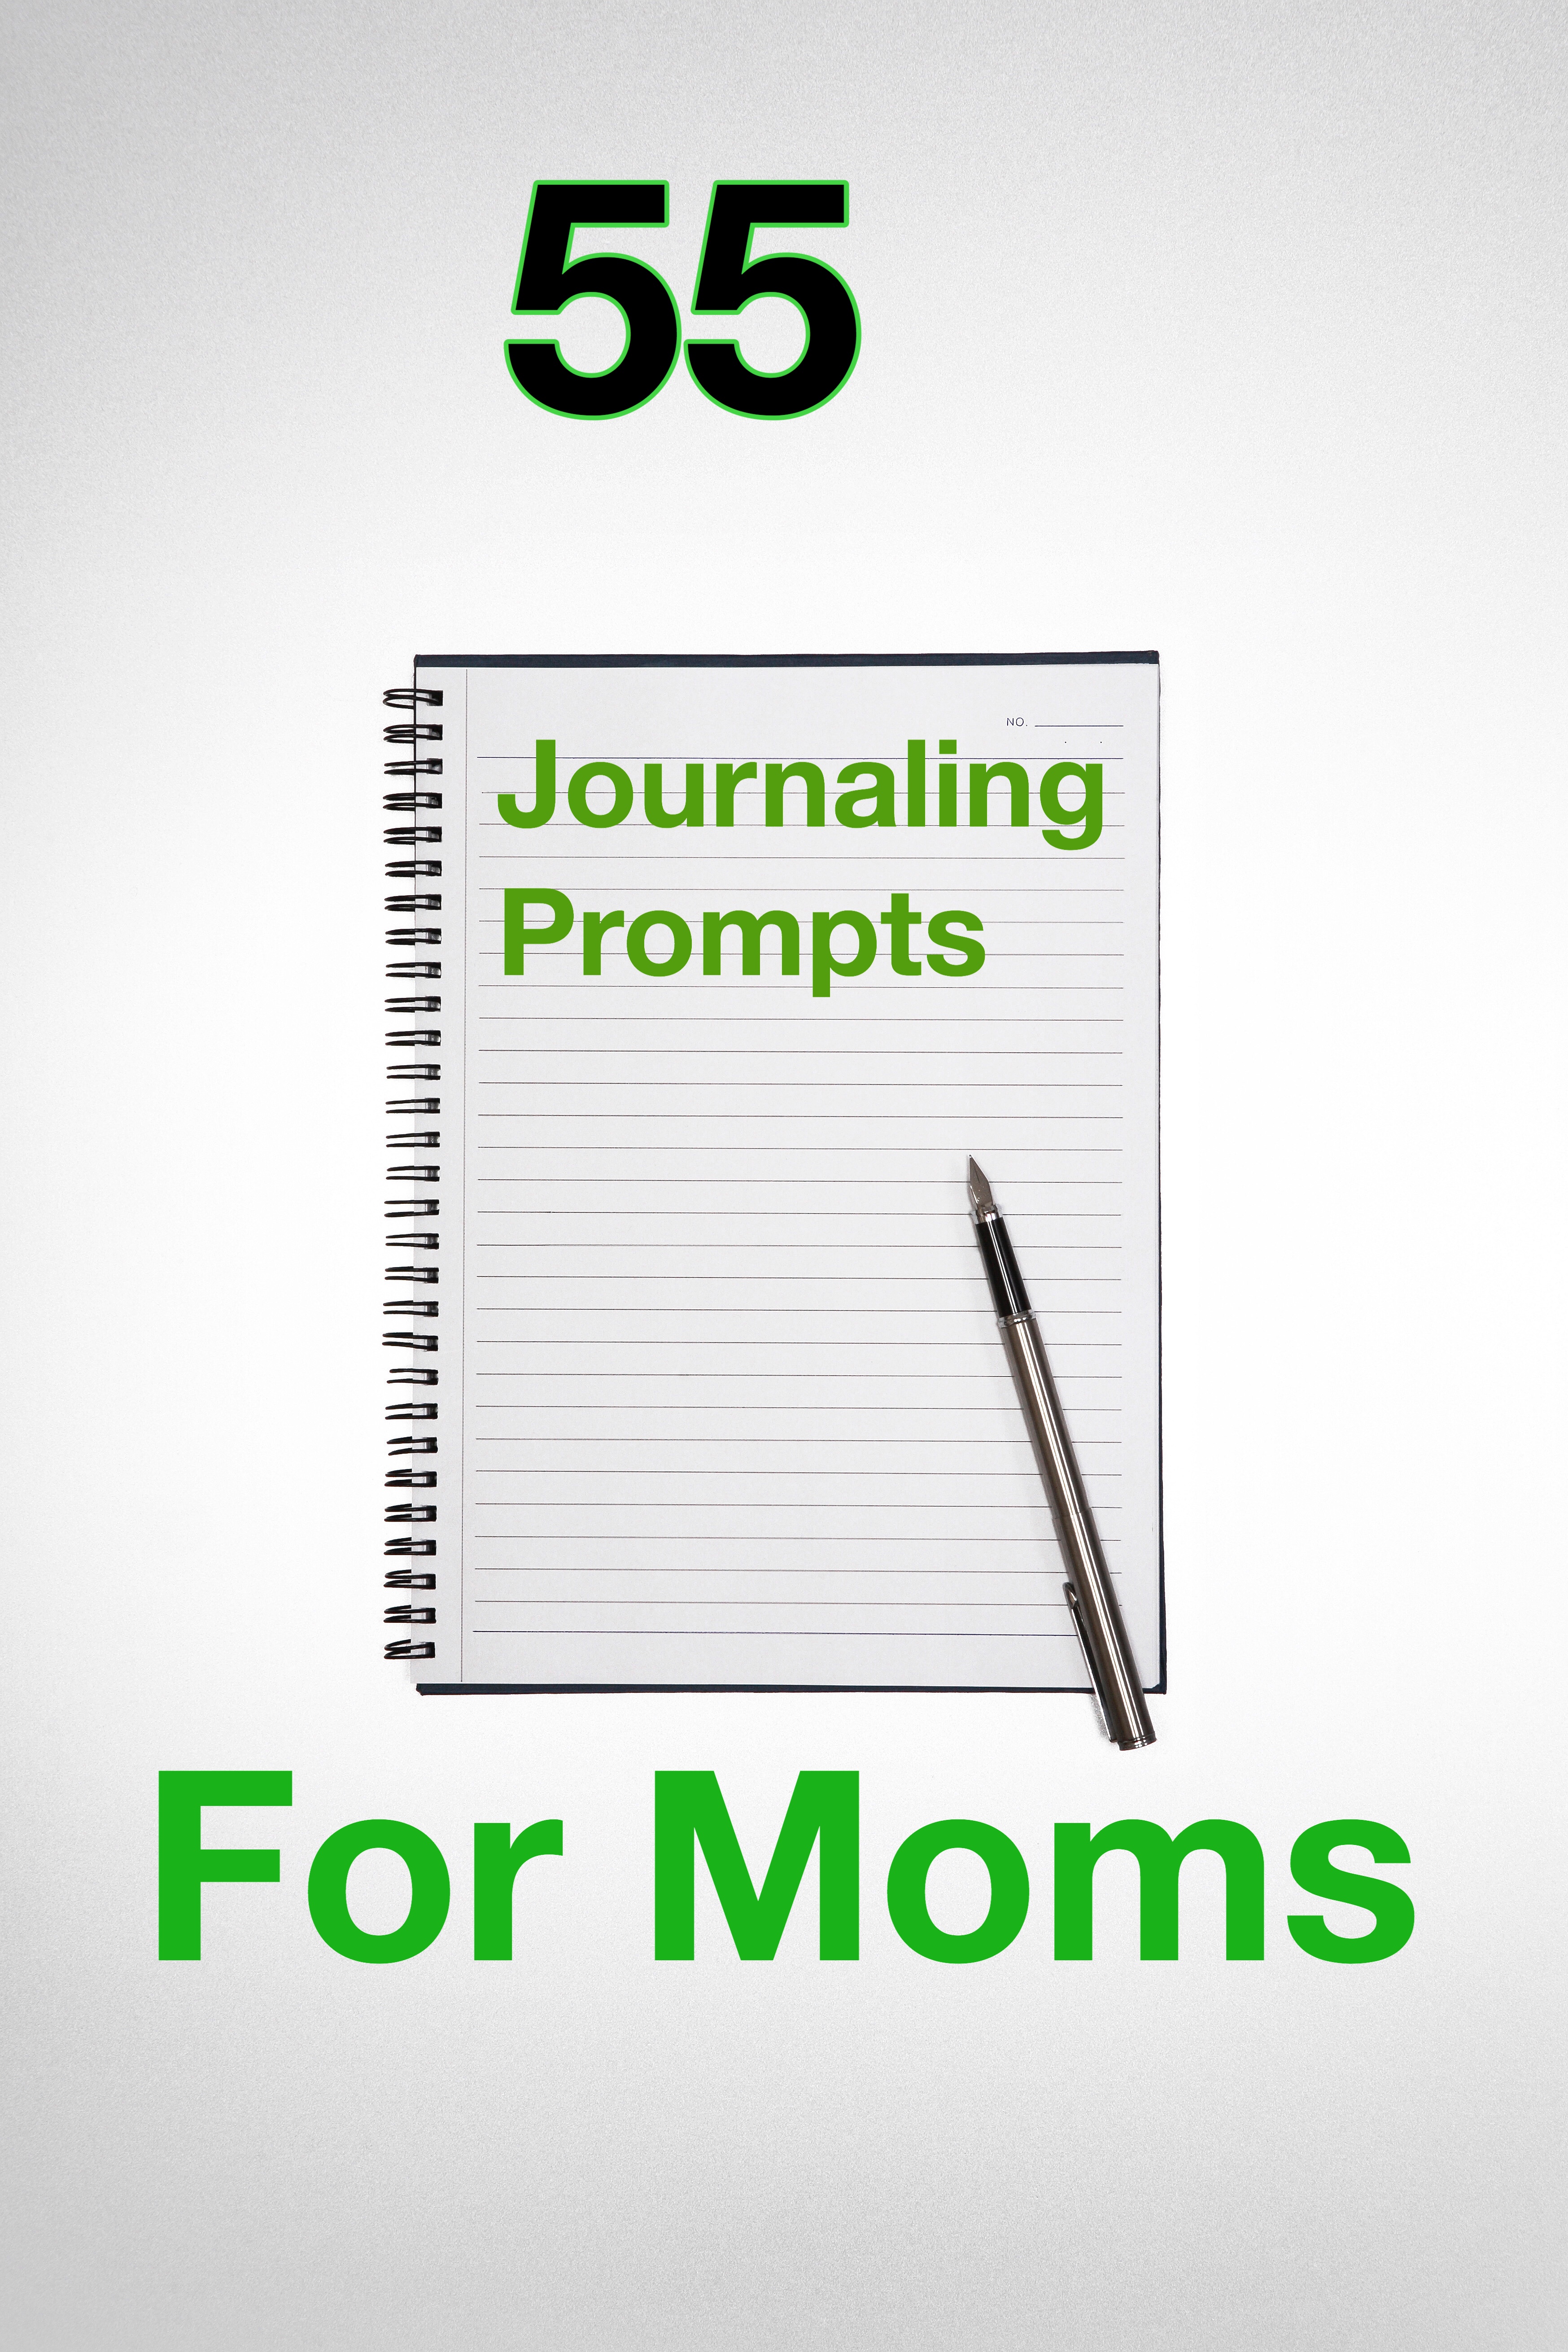 55 Journaling prompts for moms pin